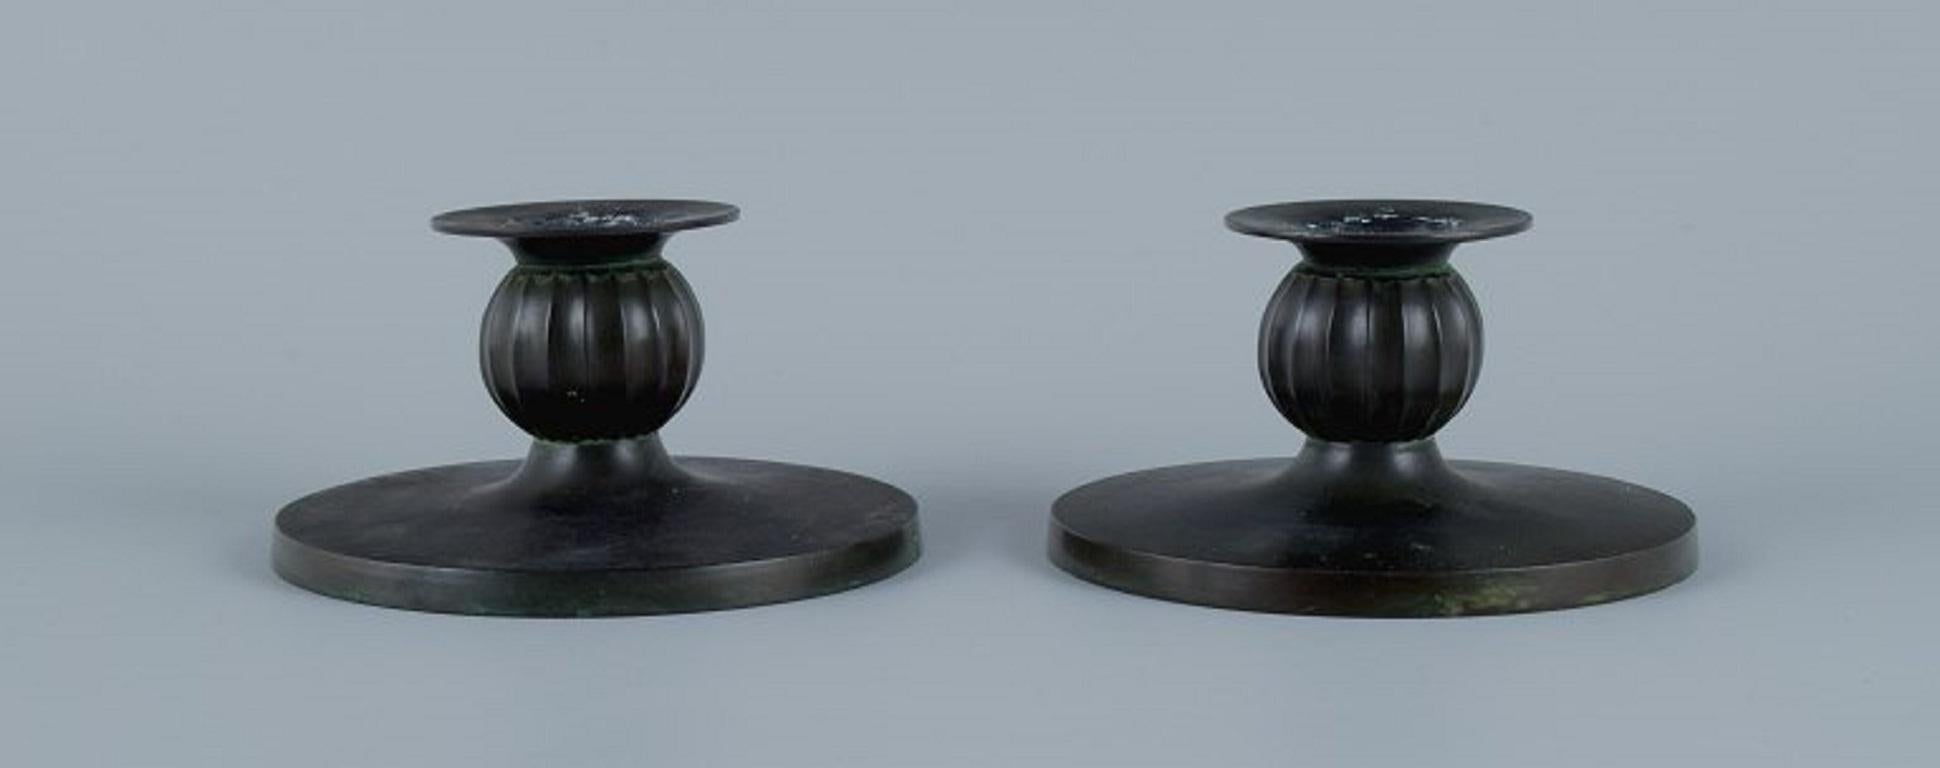 Just Andersen, a pair of Art Deco candlesticks in disco metal.
1940s.
Model number 1606.
Marked.
In good condition, with traces of use and some scratches.
Dimensions: D 12.5 x H 7.0 cm.